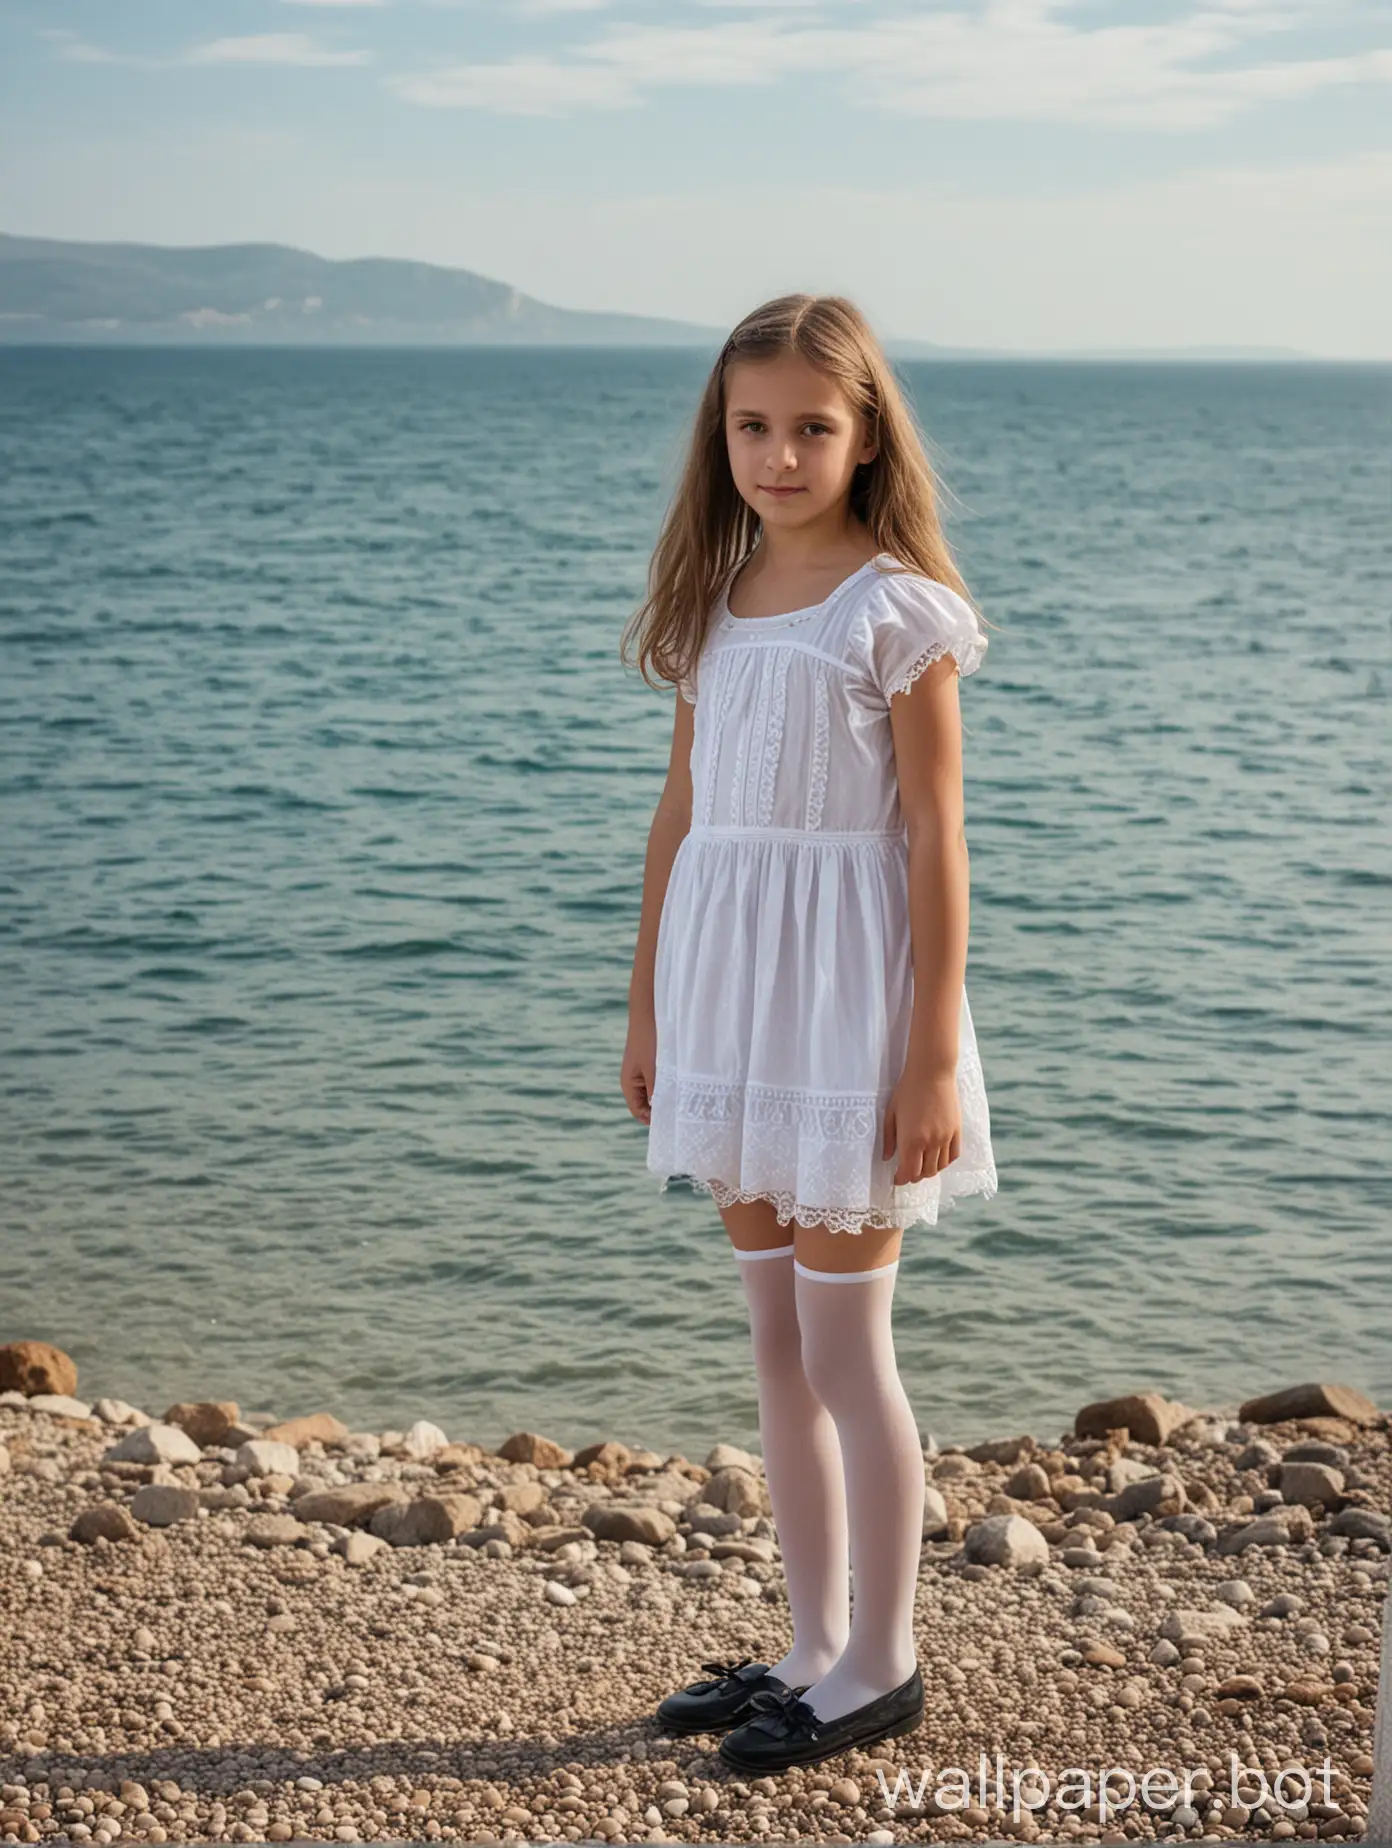 Crimea, sea view, 10-year-old girl in a short dress with stockings, full-length